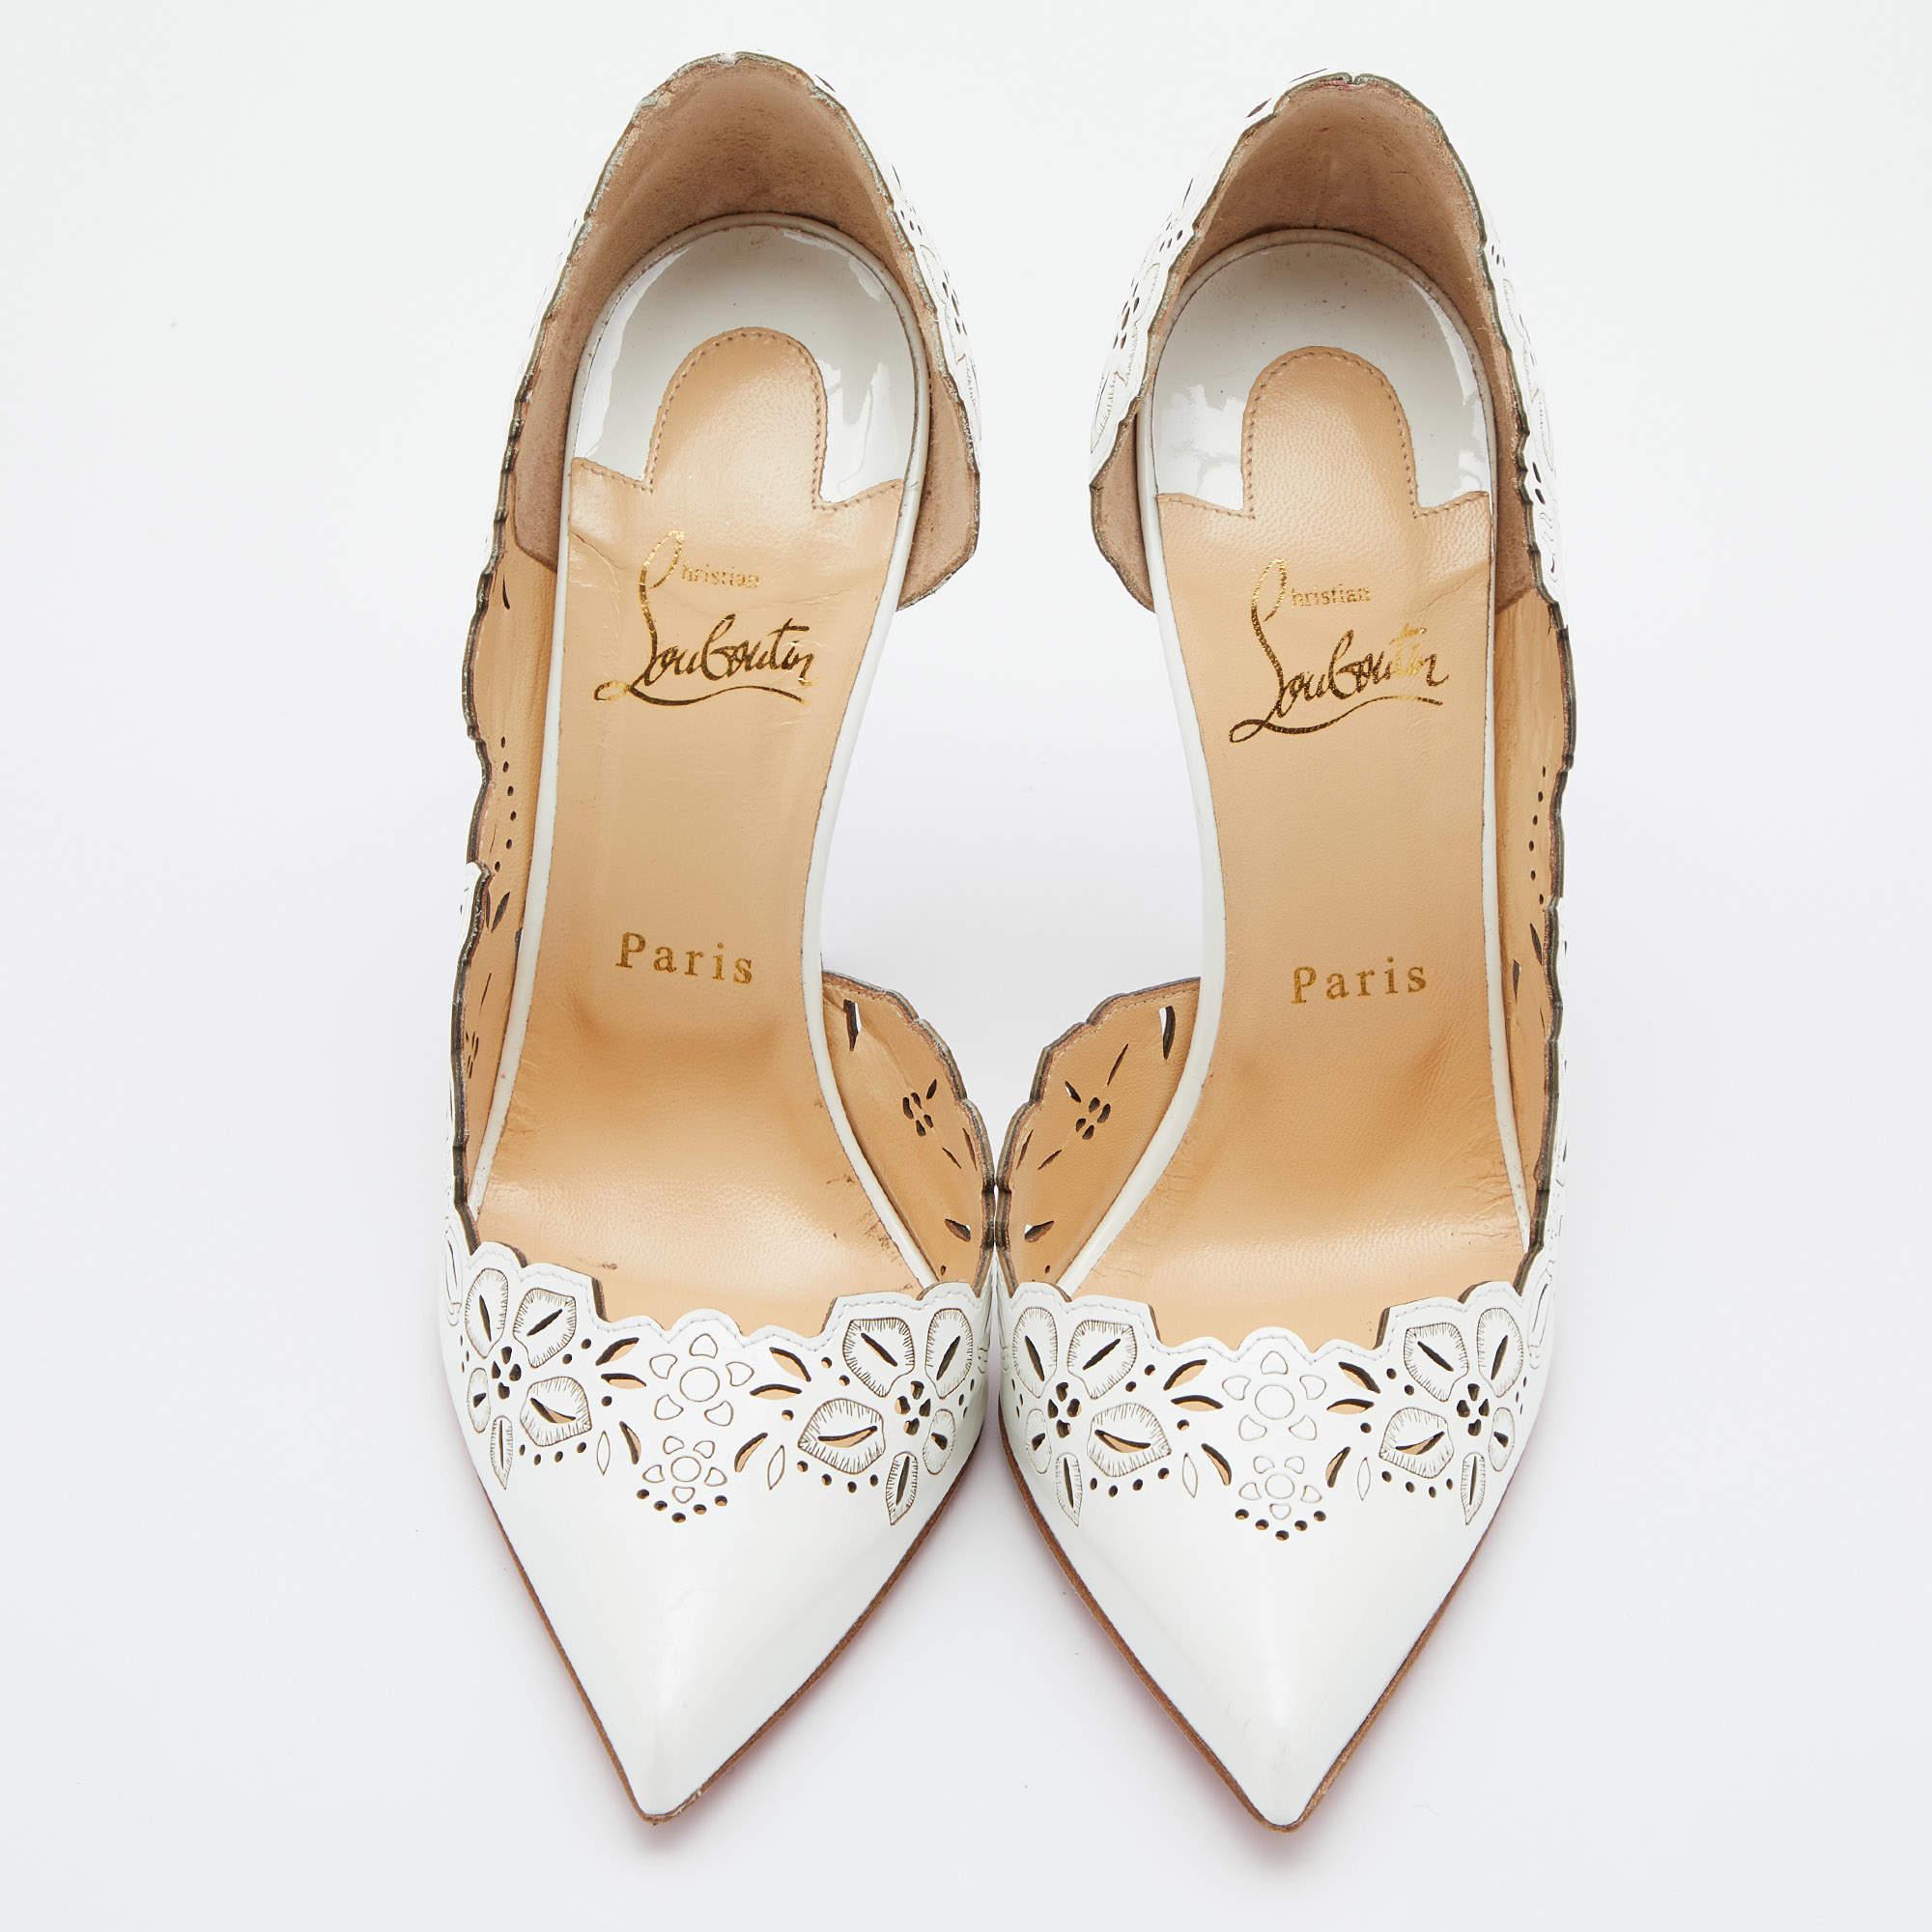 Christian Louboutin White Leather Beloved Pumps Size 38.5 1